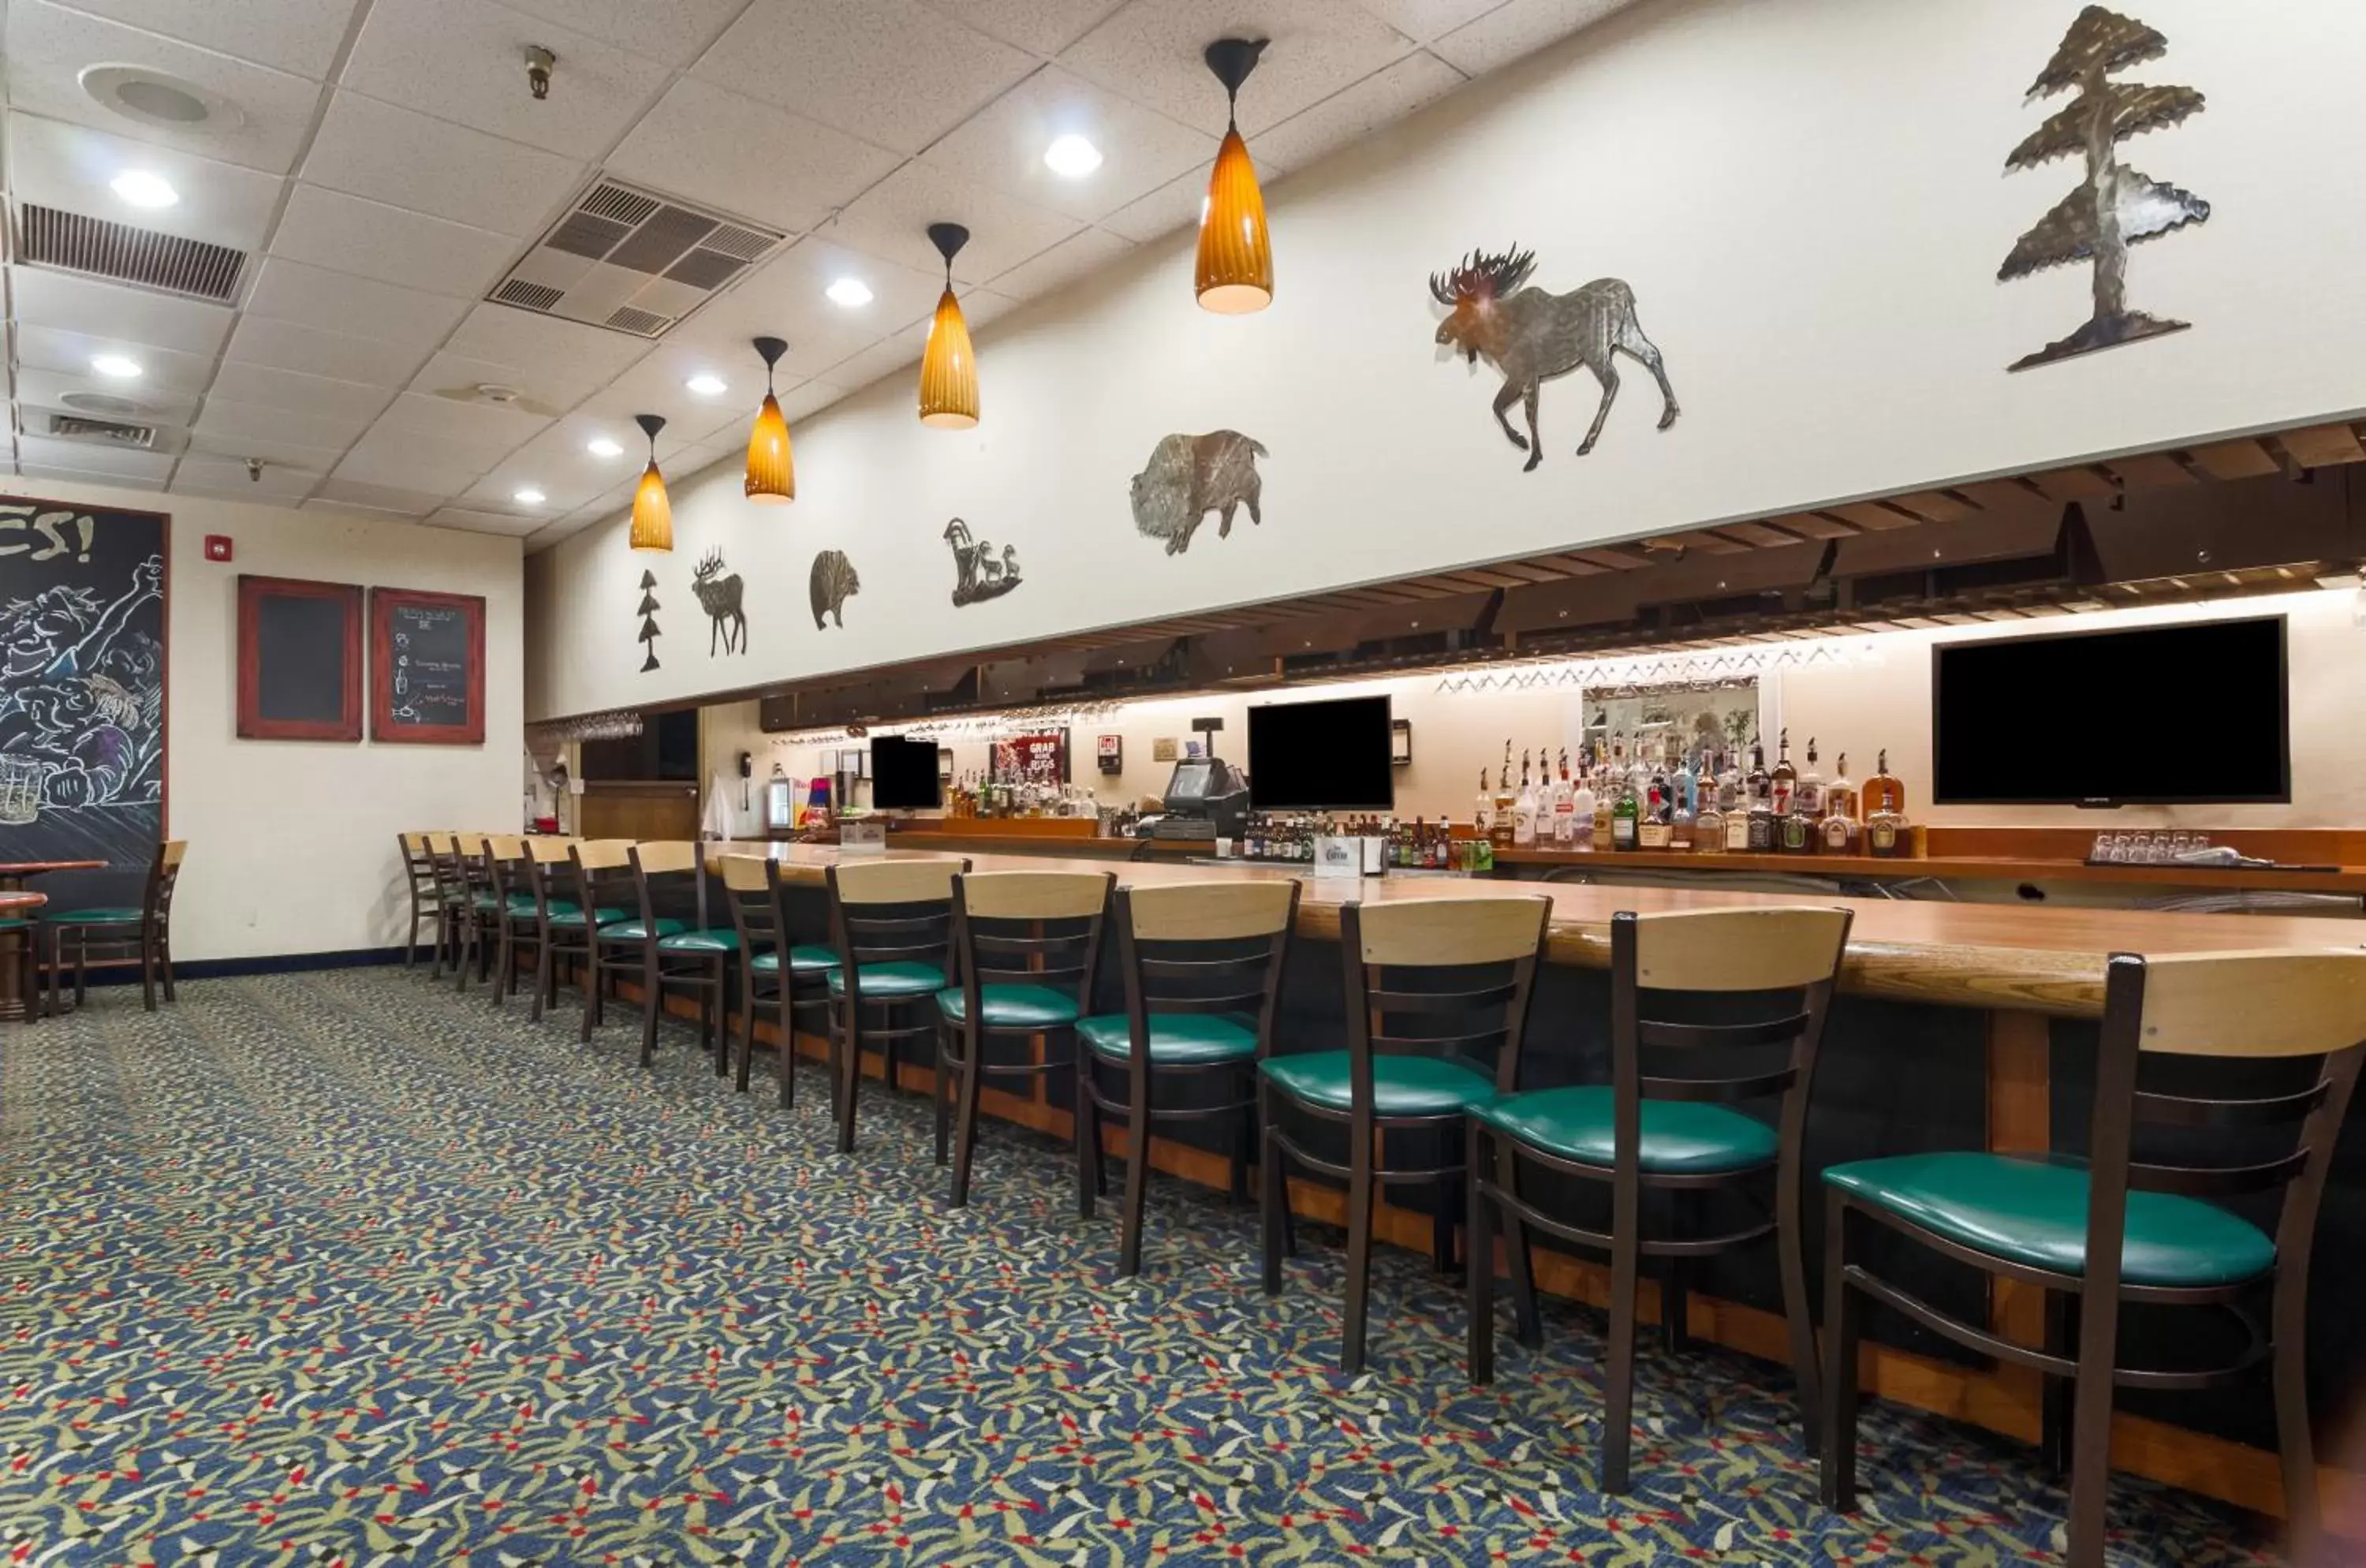 Lounge or bar, Banquet Facilities in Red Lion Hotel Cheyenne